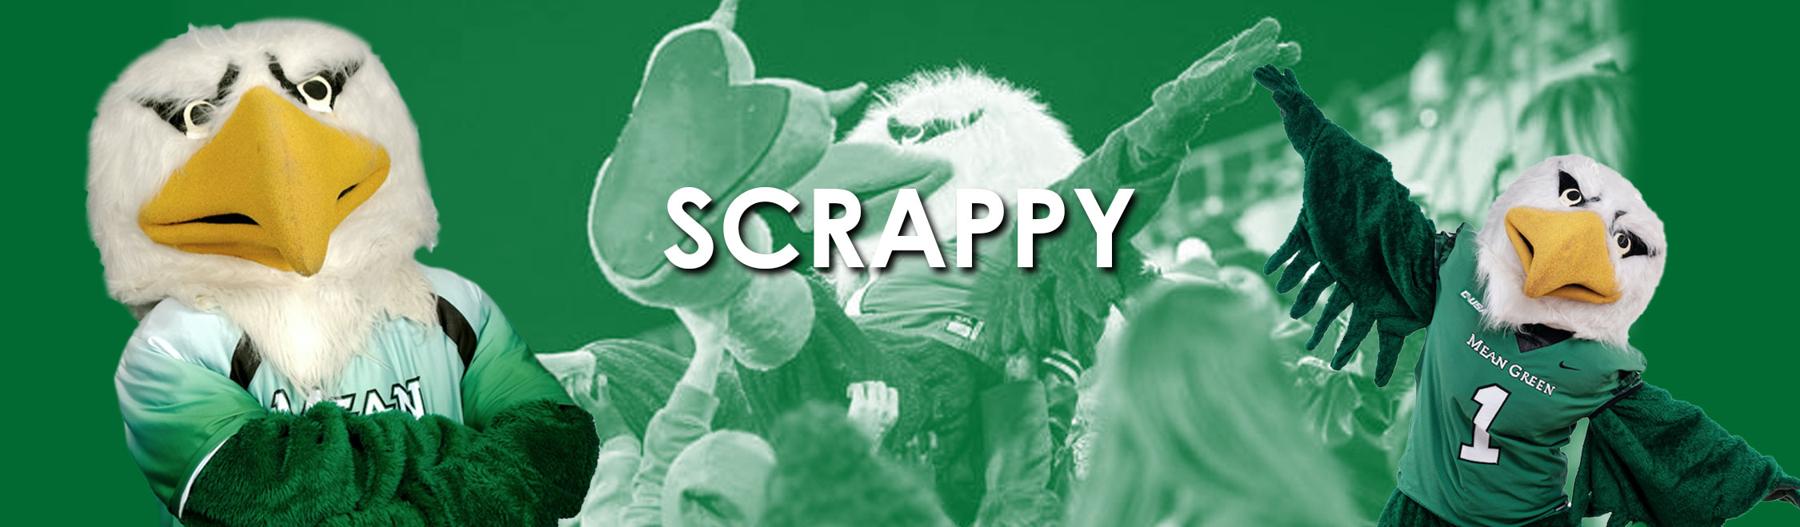 Scrappy